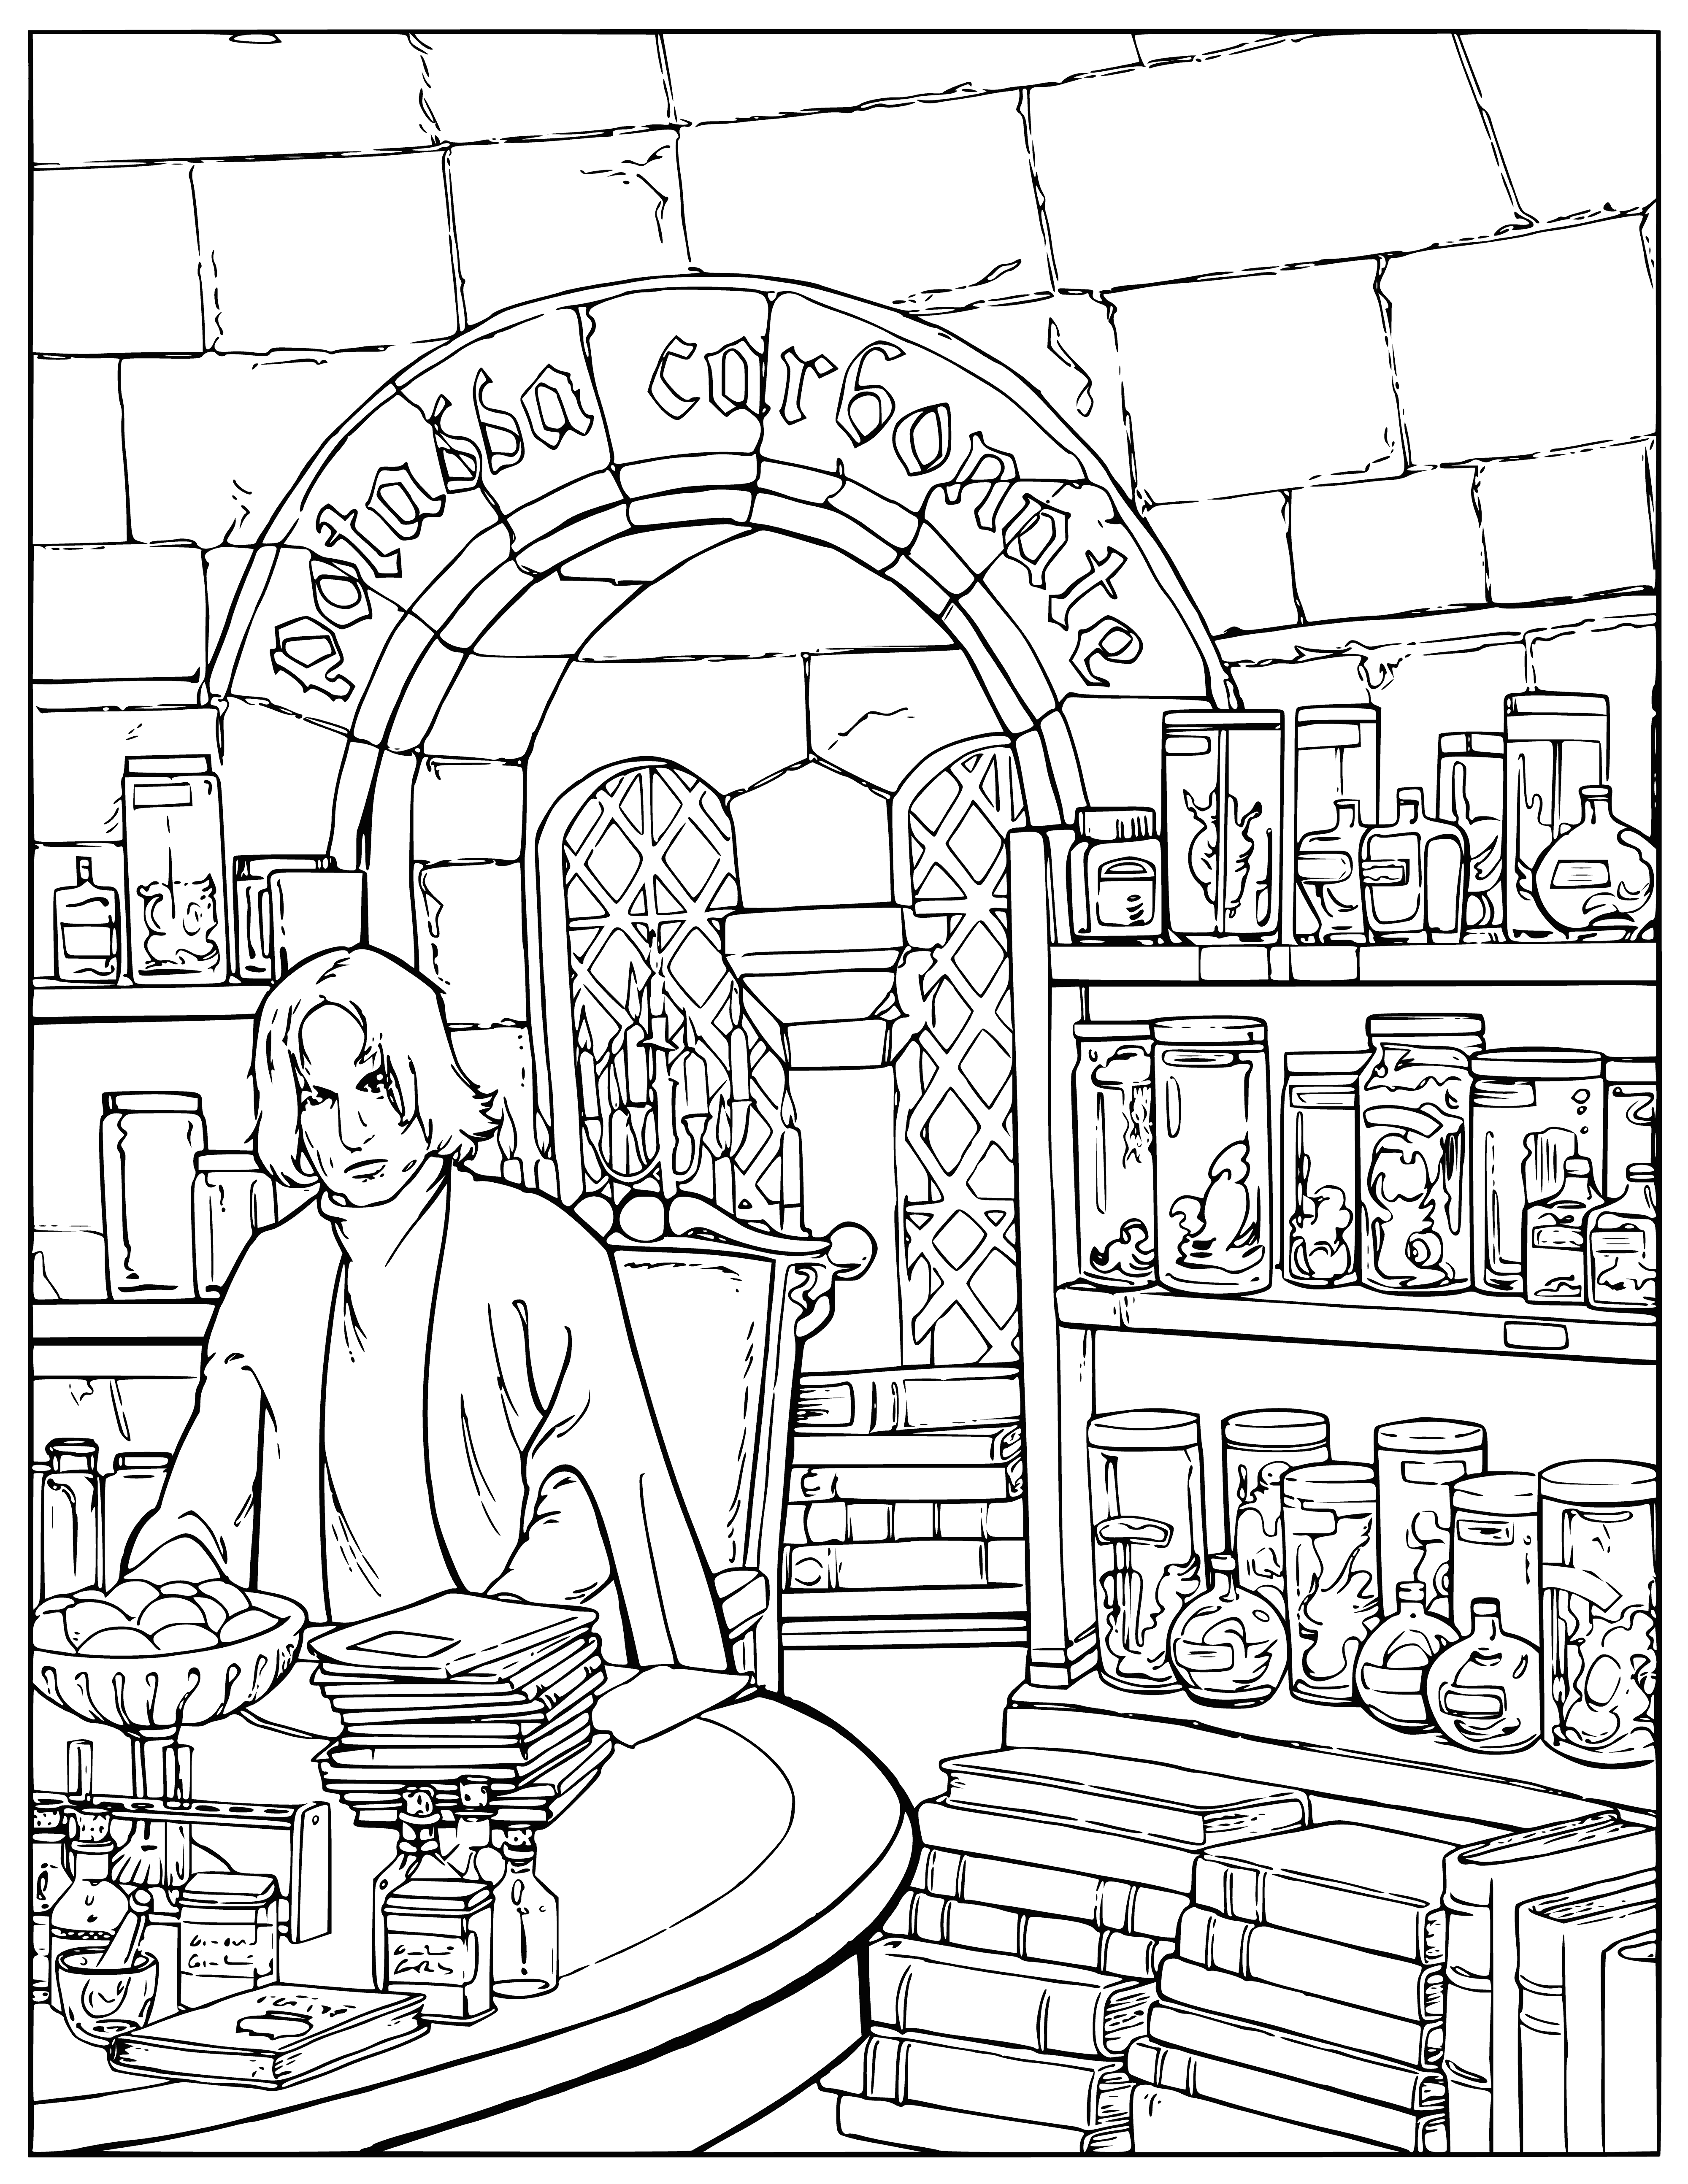 coloring page: Man in black robes stands before beakers and potions, black hair and hooked nose. Holds wand, serious look.